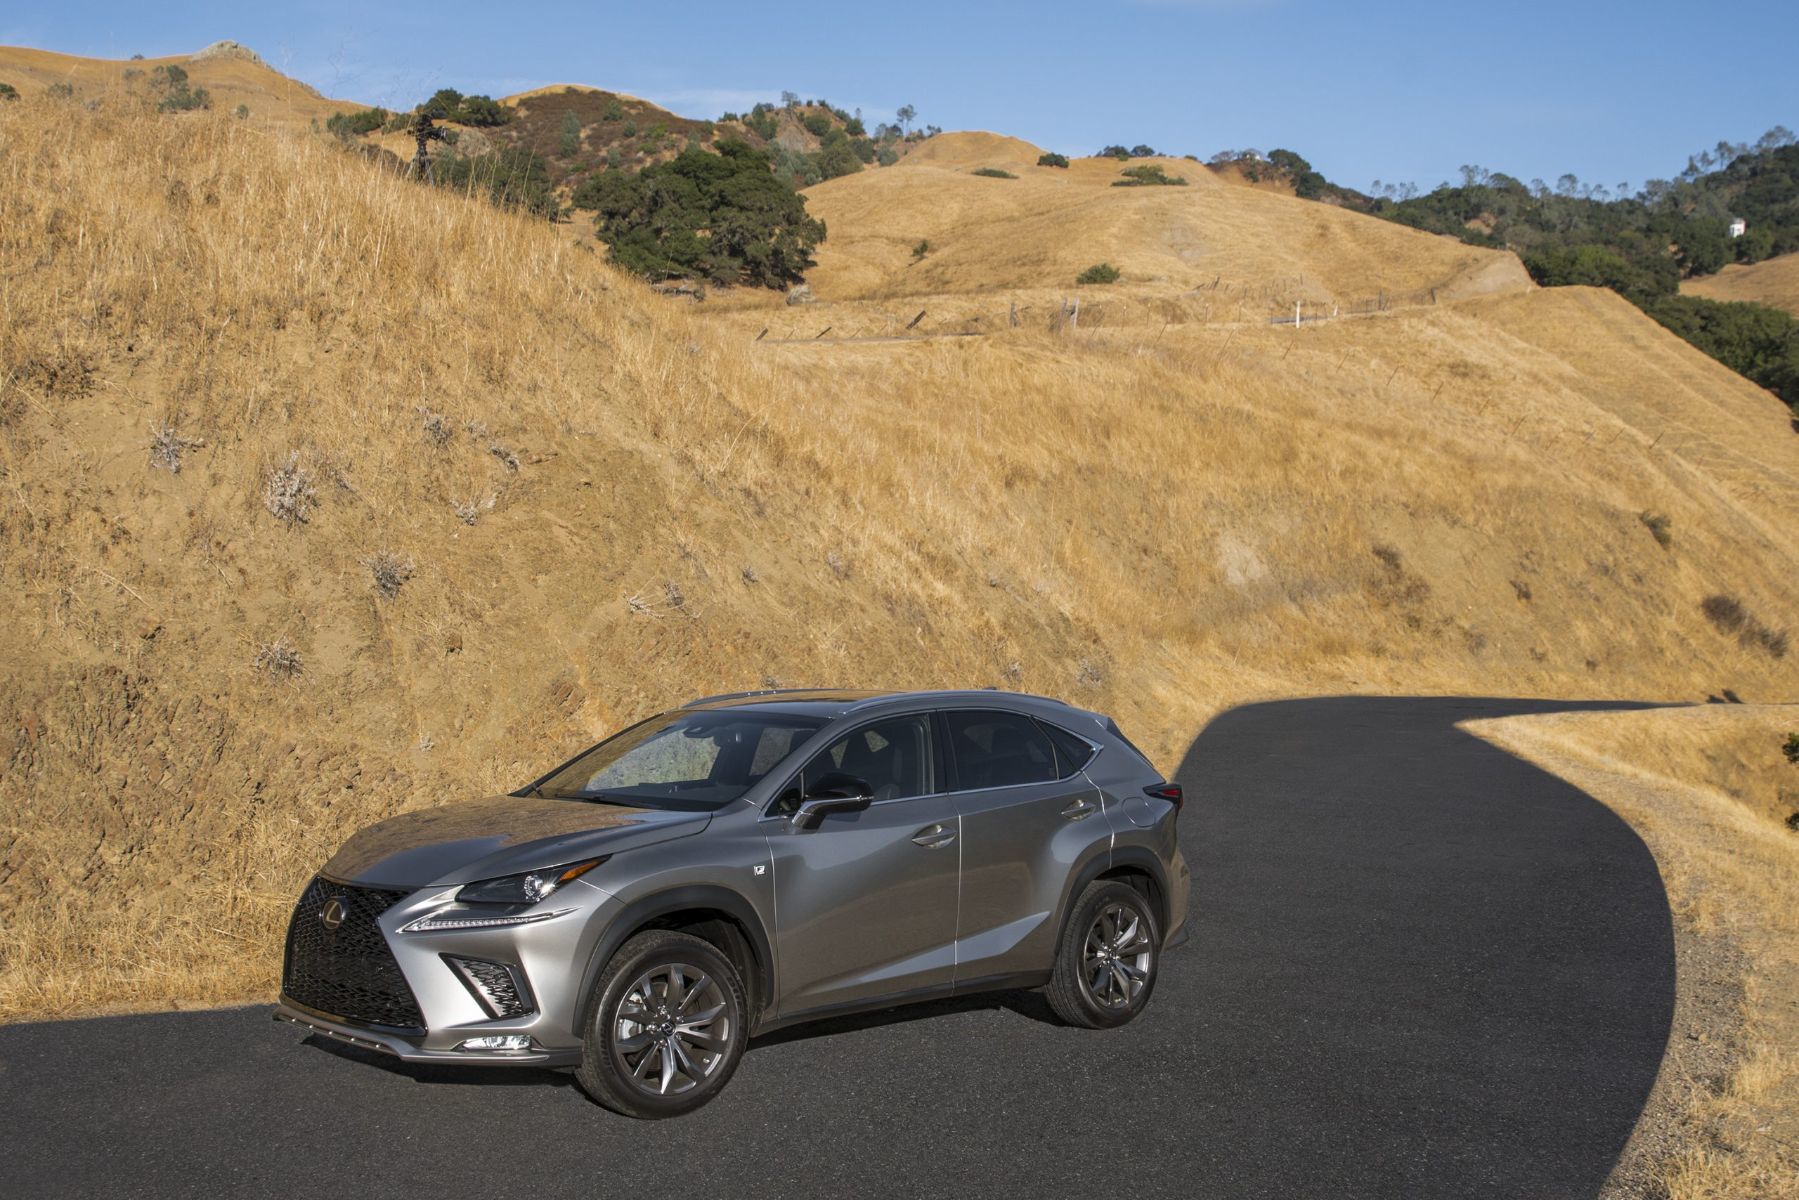 The 2020 Lexus NX is A Strong Contender in the Pre-Owned Luxury Segment